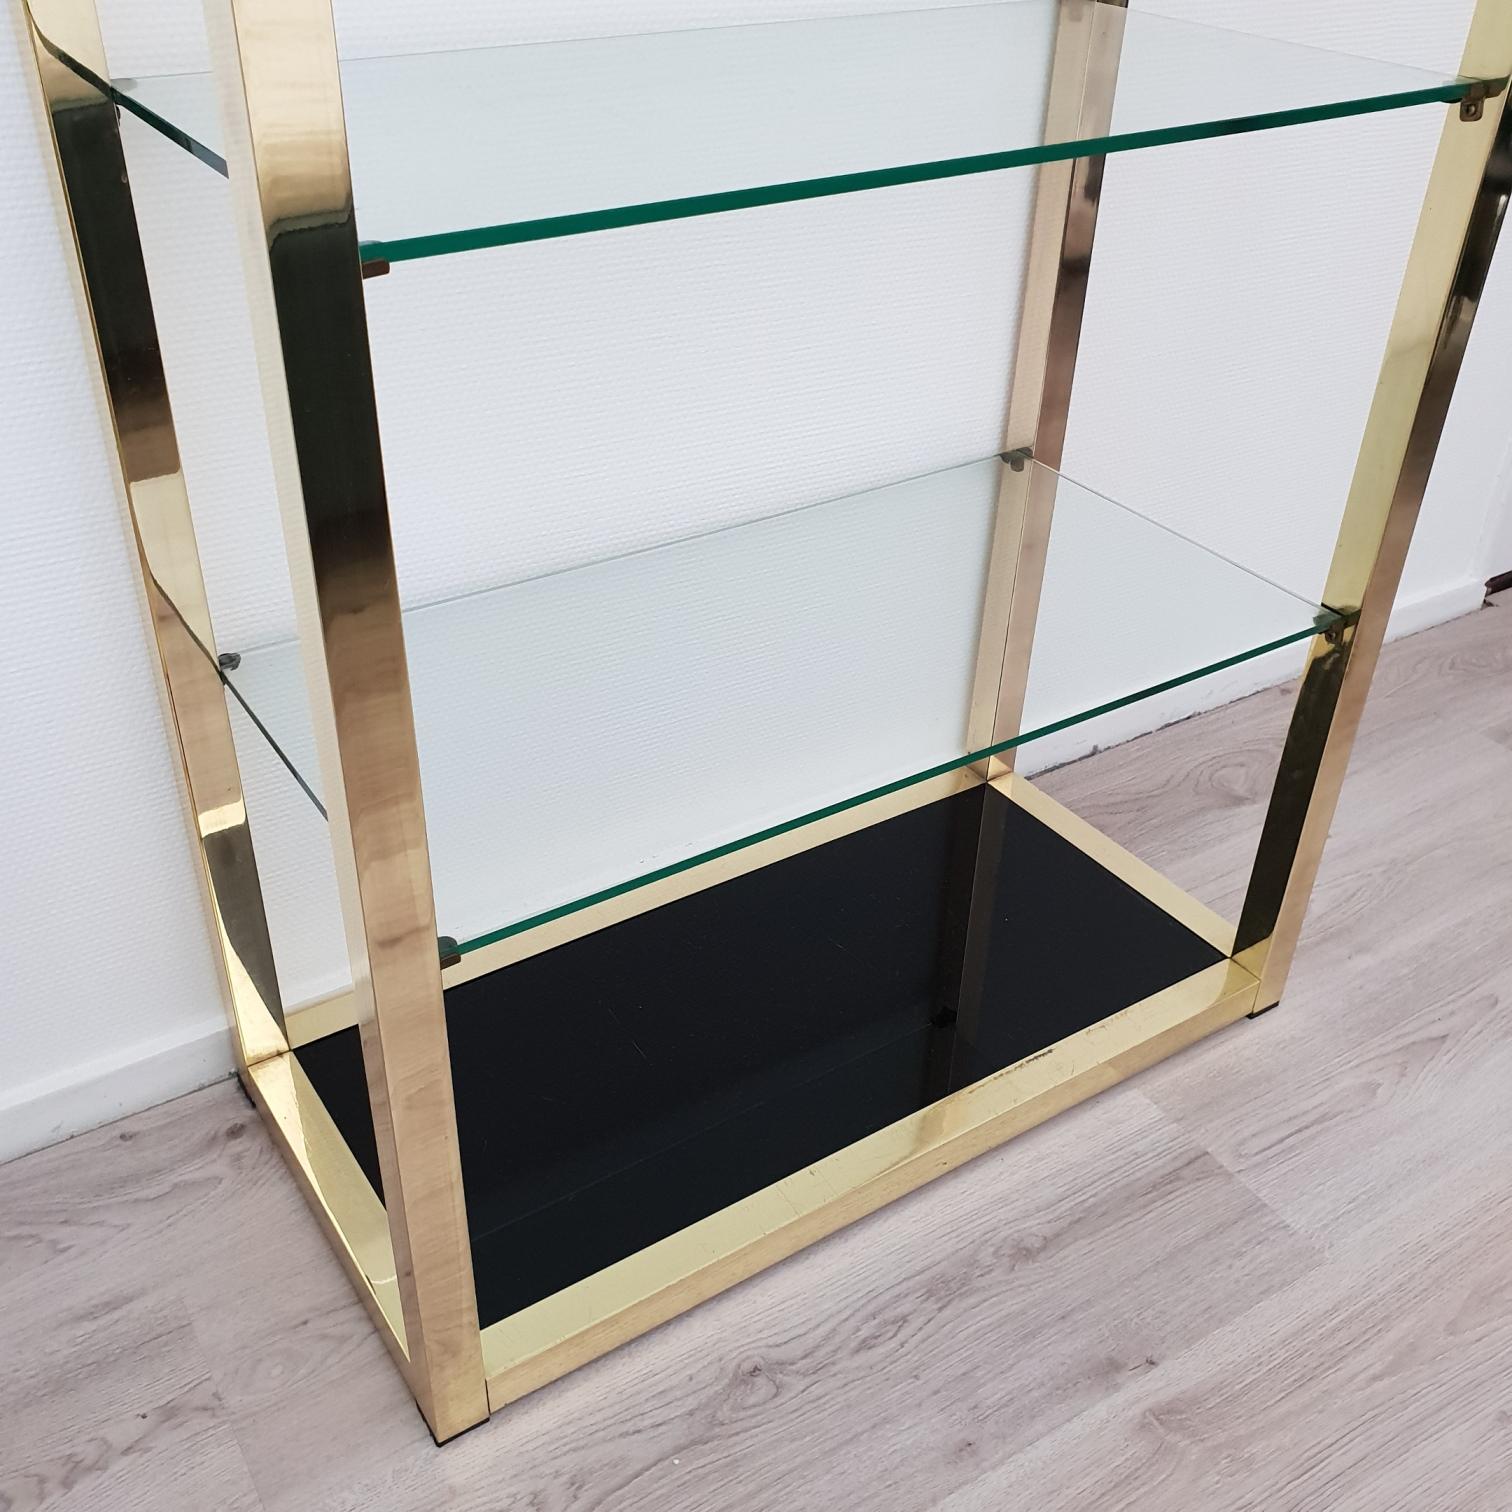 Italian Mid-Century Modern Gold Plated Shelving Unit Étagère, 1970s In Good Condition For Sale In Valkenswaard, NL